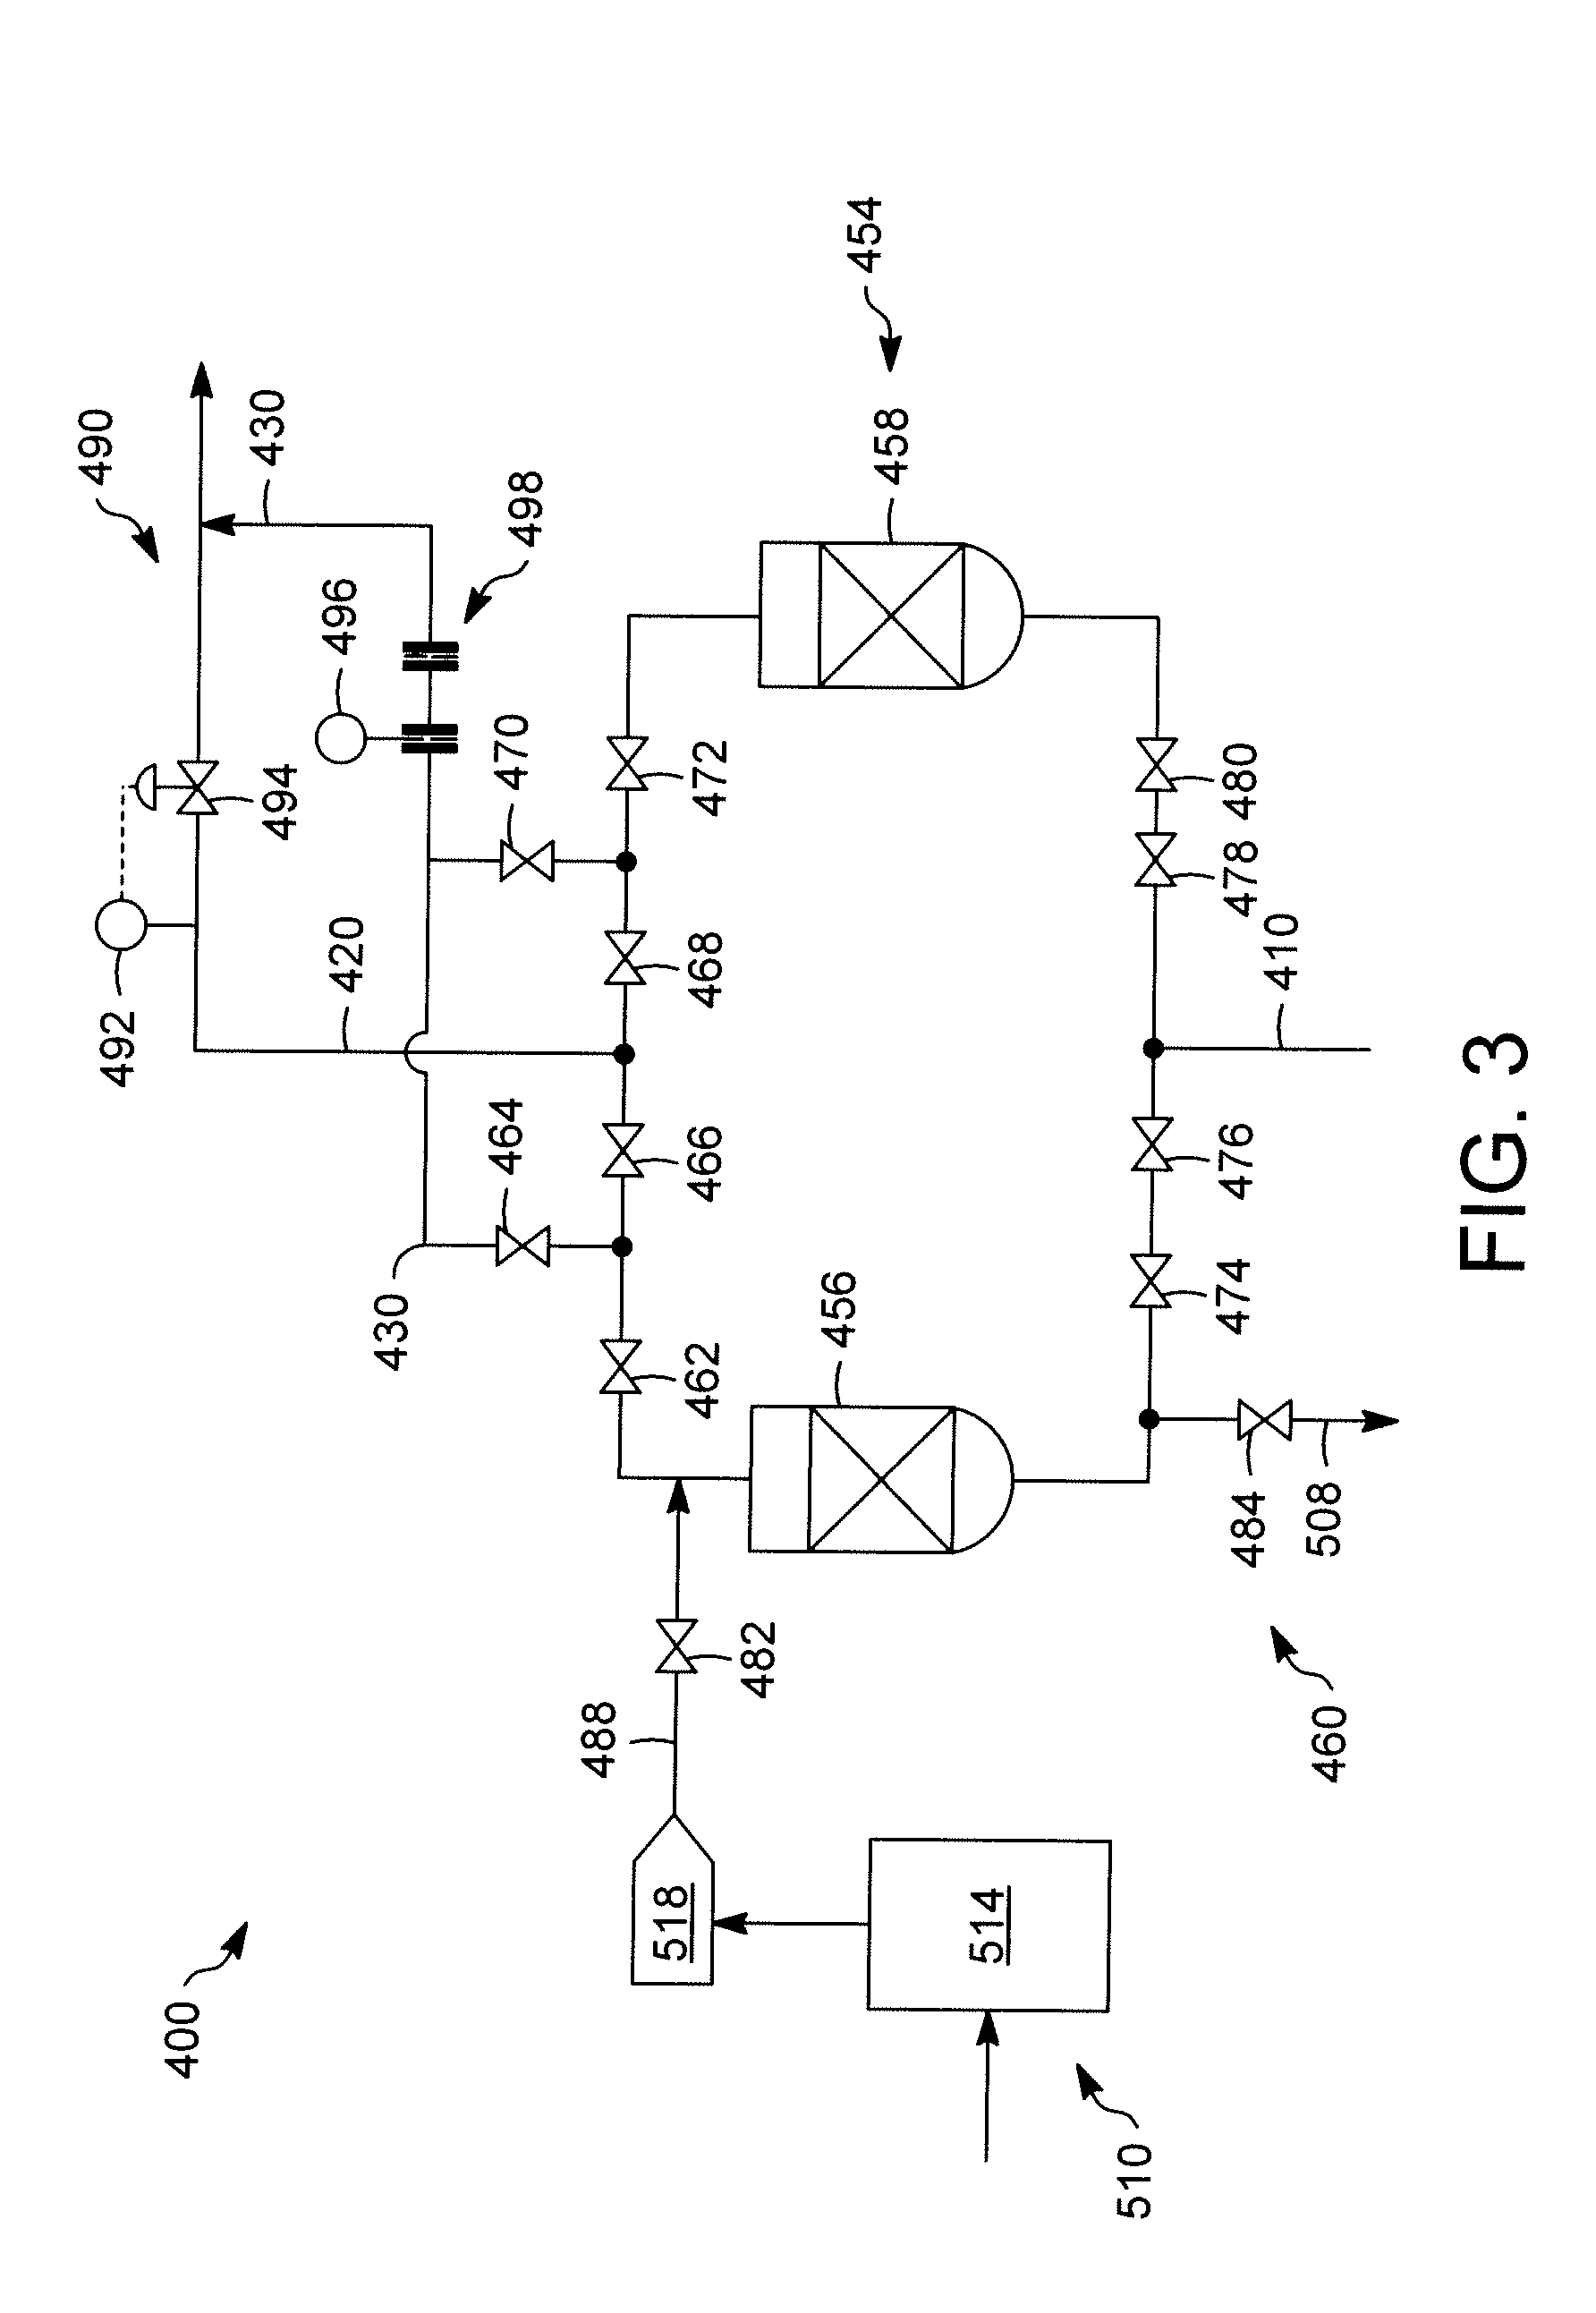 Apparatus and Process for Isomerizing a Hydrocarbon Stream